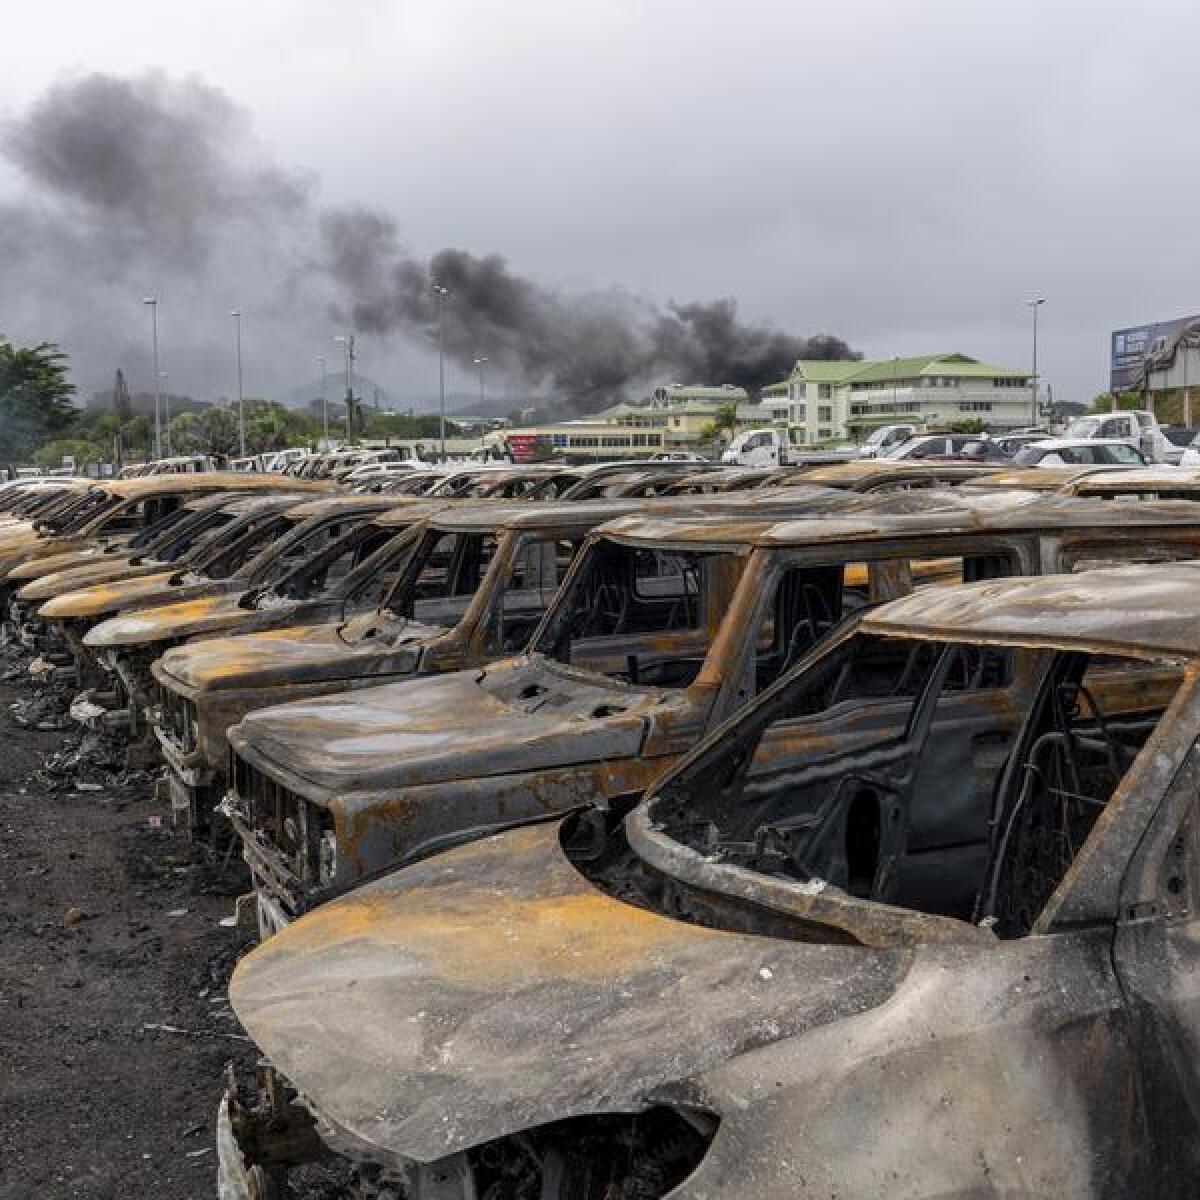 Burnt cars are lined up after unrest in Noumea, New Caledonia